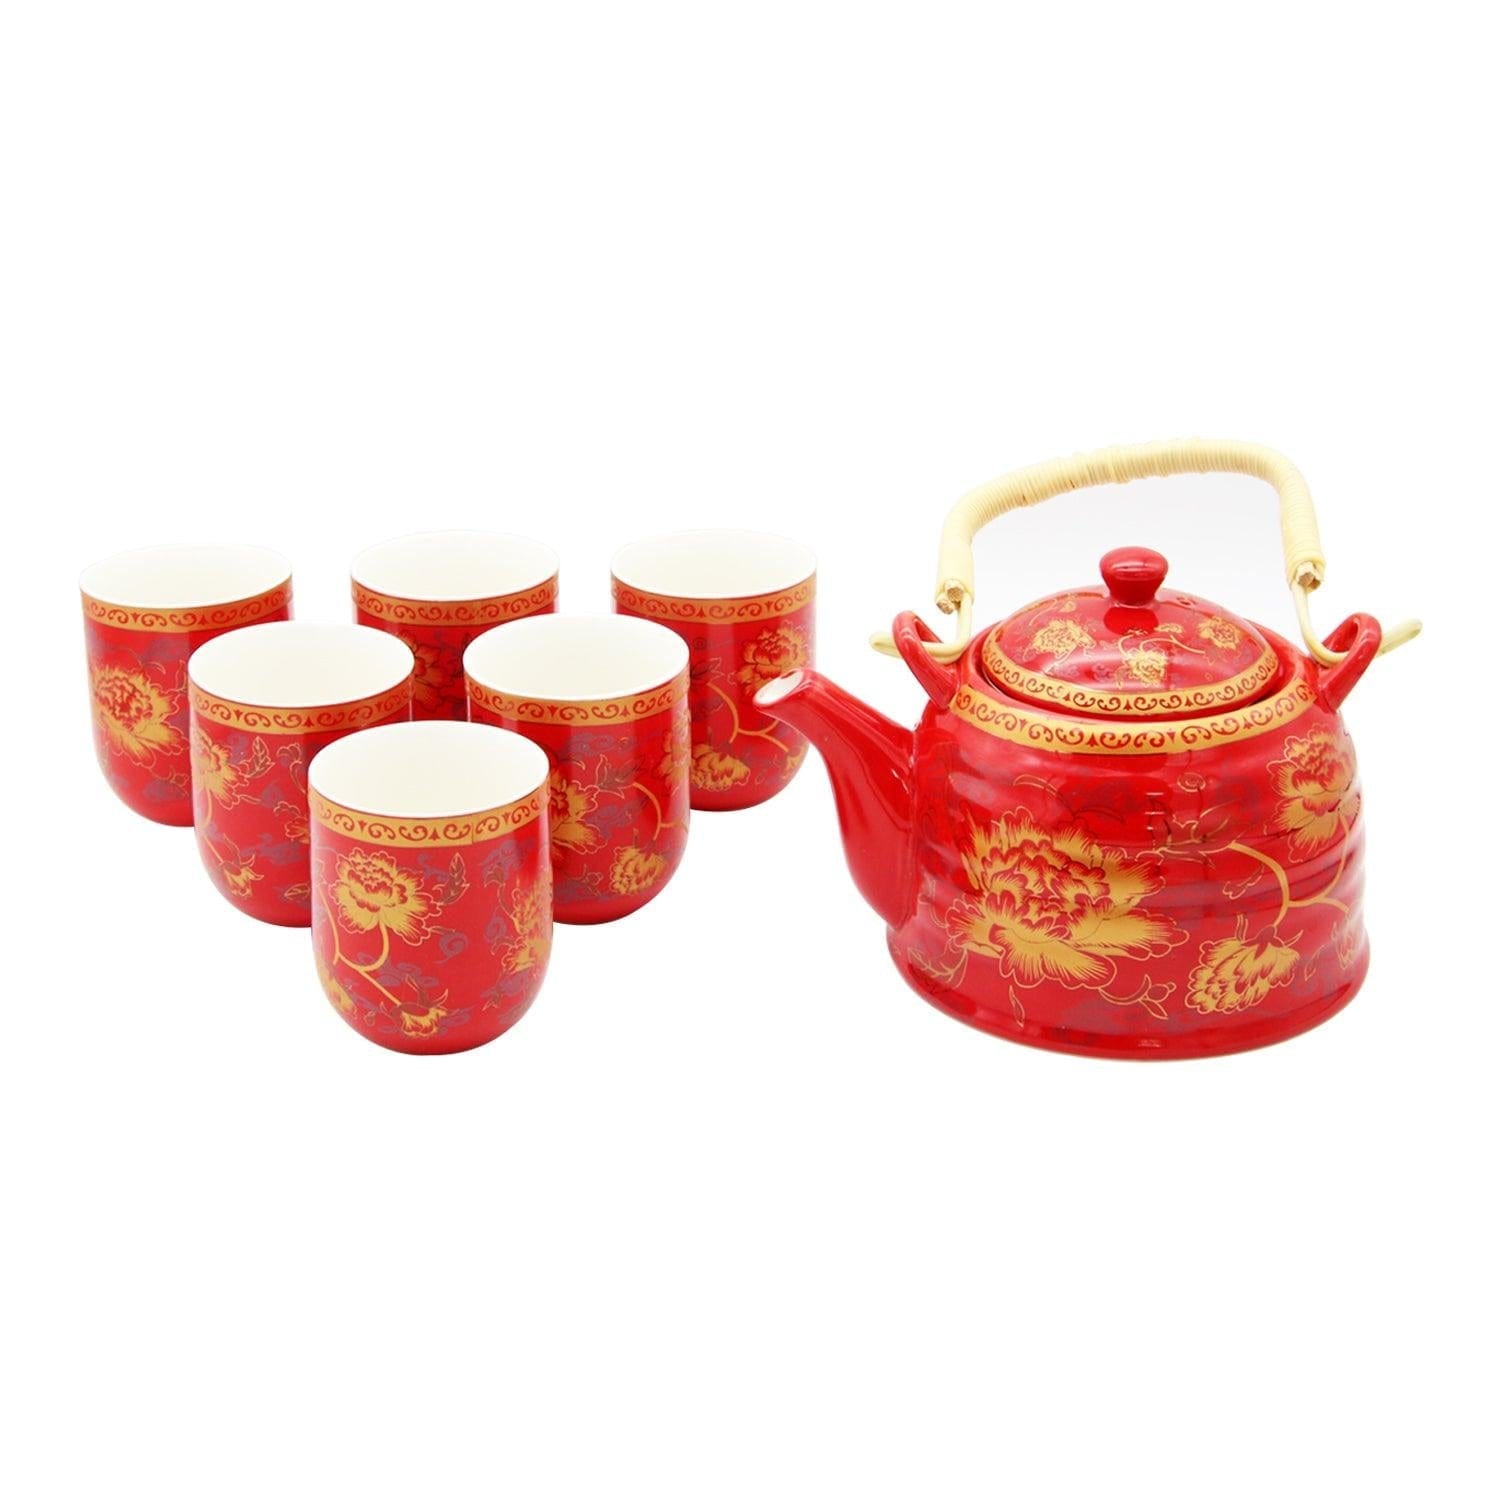 Golden Thin Flower on Red Ceramic Tea Pot & 6 Cup Sets with SS Infuser in Gift Box